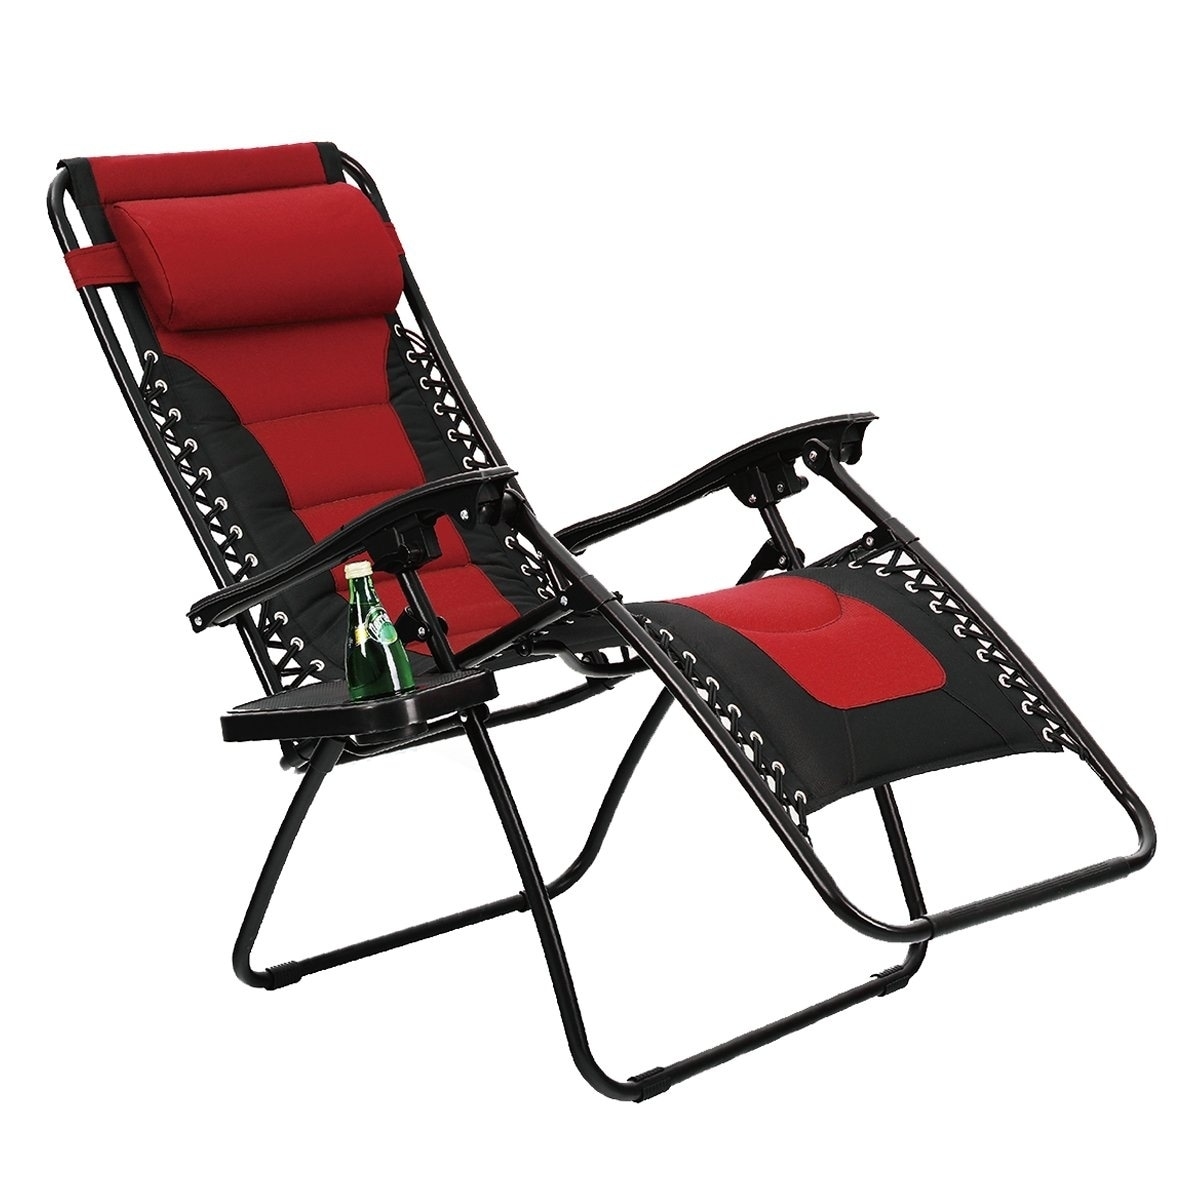 Zero Gravity Adjustable Chaise Lounge Chair Recliner Outdoor Patio Furniture Set